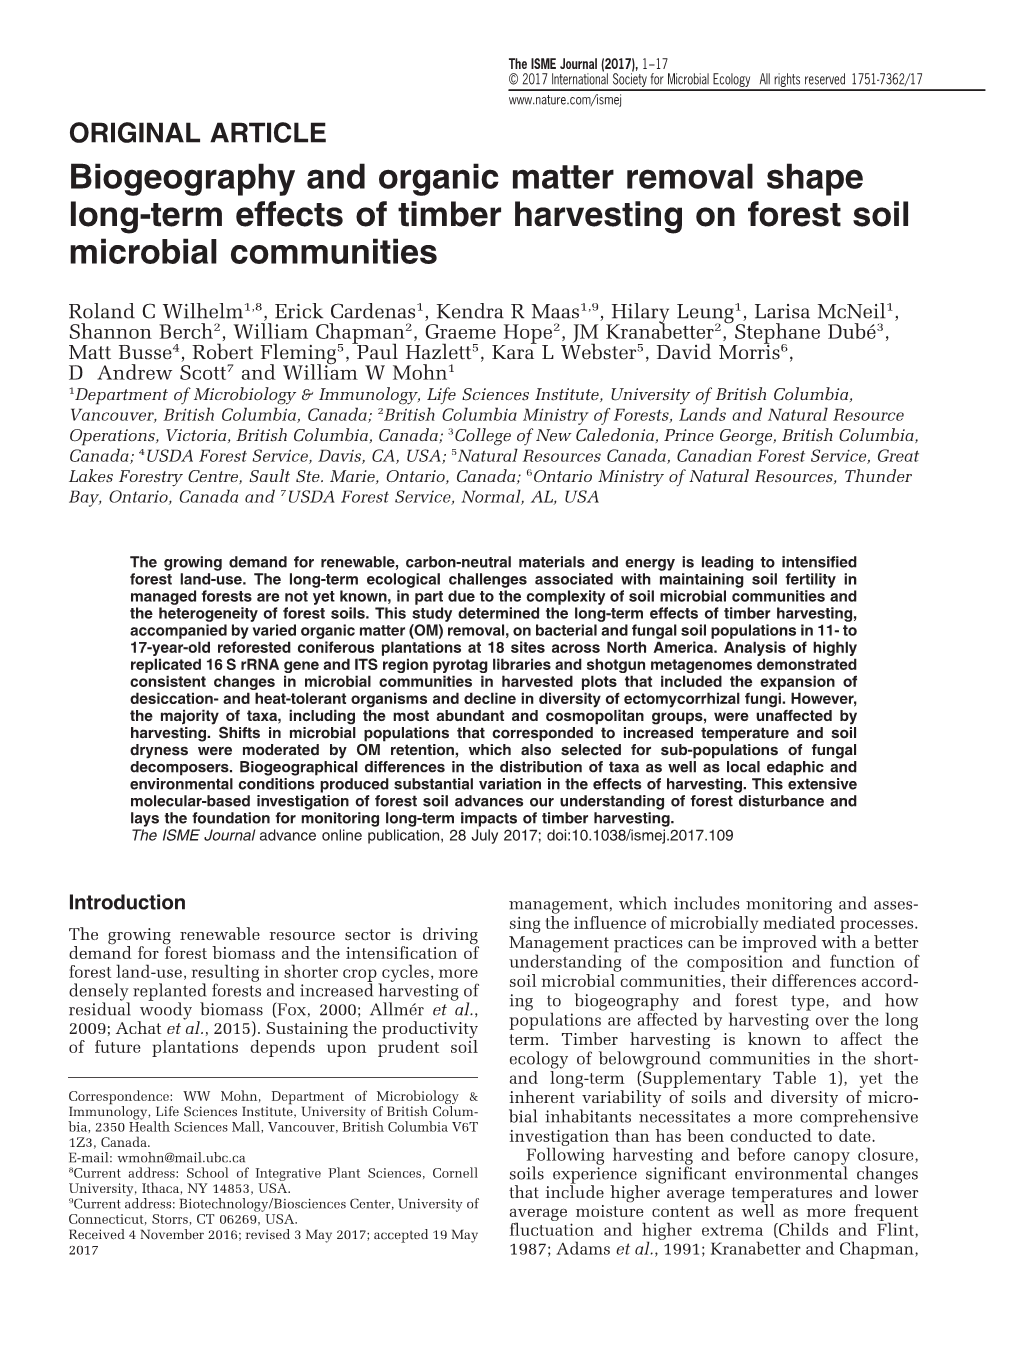 Biogeography and Organic Matter Removal Shape Long-Term Effects of Timber Harvesting on Forest Soil Microbial Communities